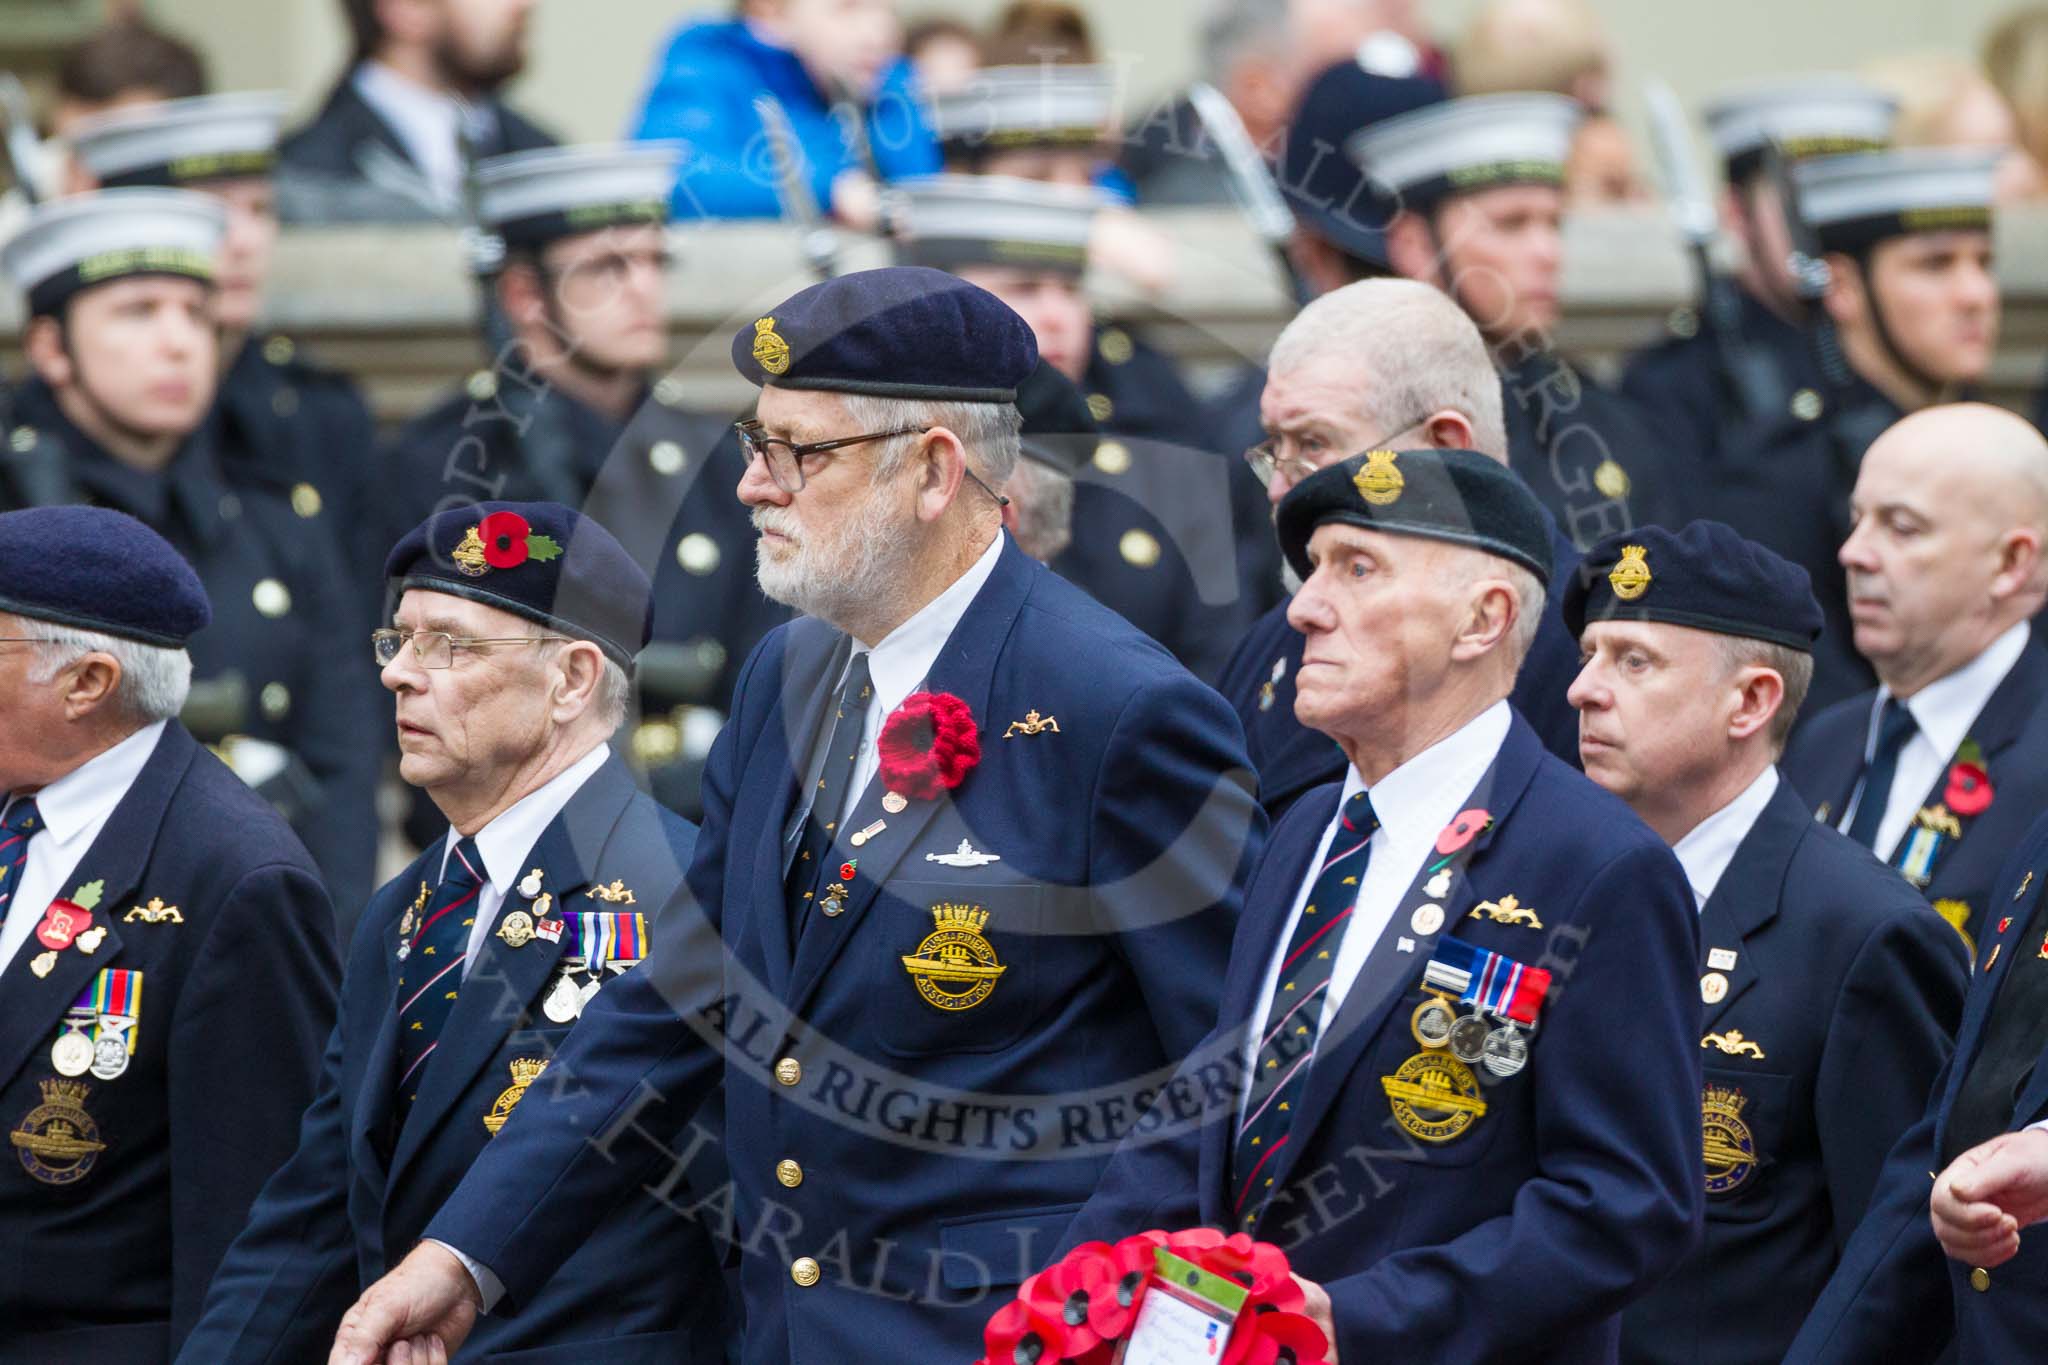 Remembrance Sunday at the Cenotaph 2015: Group E25, Submariners Association.
Cenotaph, Whitehall, London SW1,
London,
Greater London,
United Kingdom,
on 08 November 2015 at 12:02, image #926